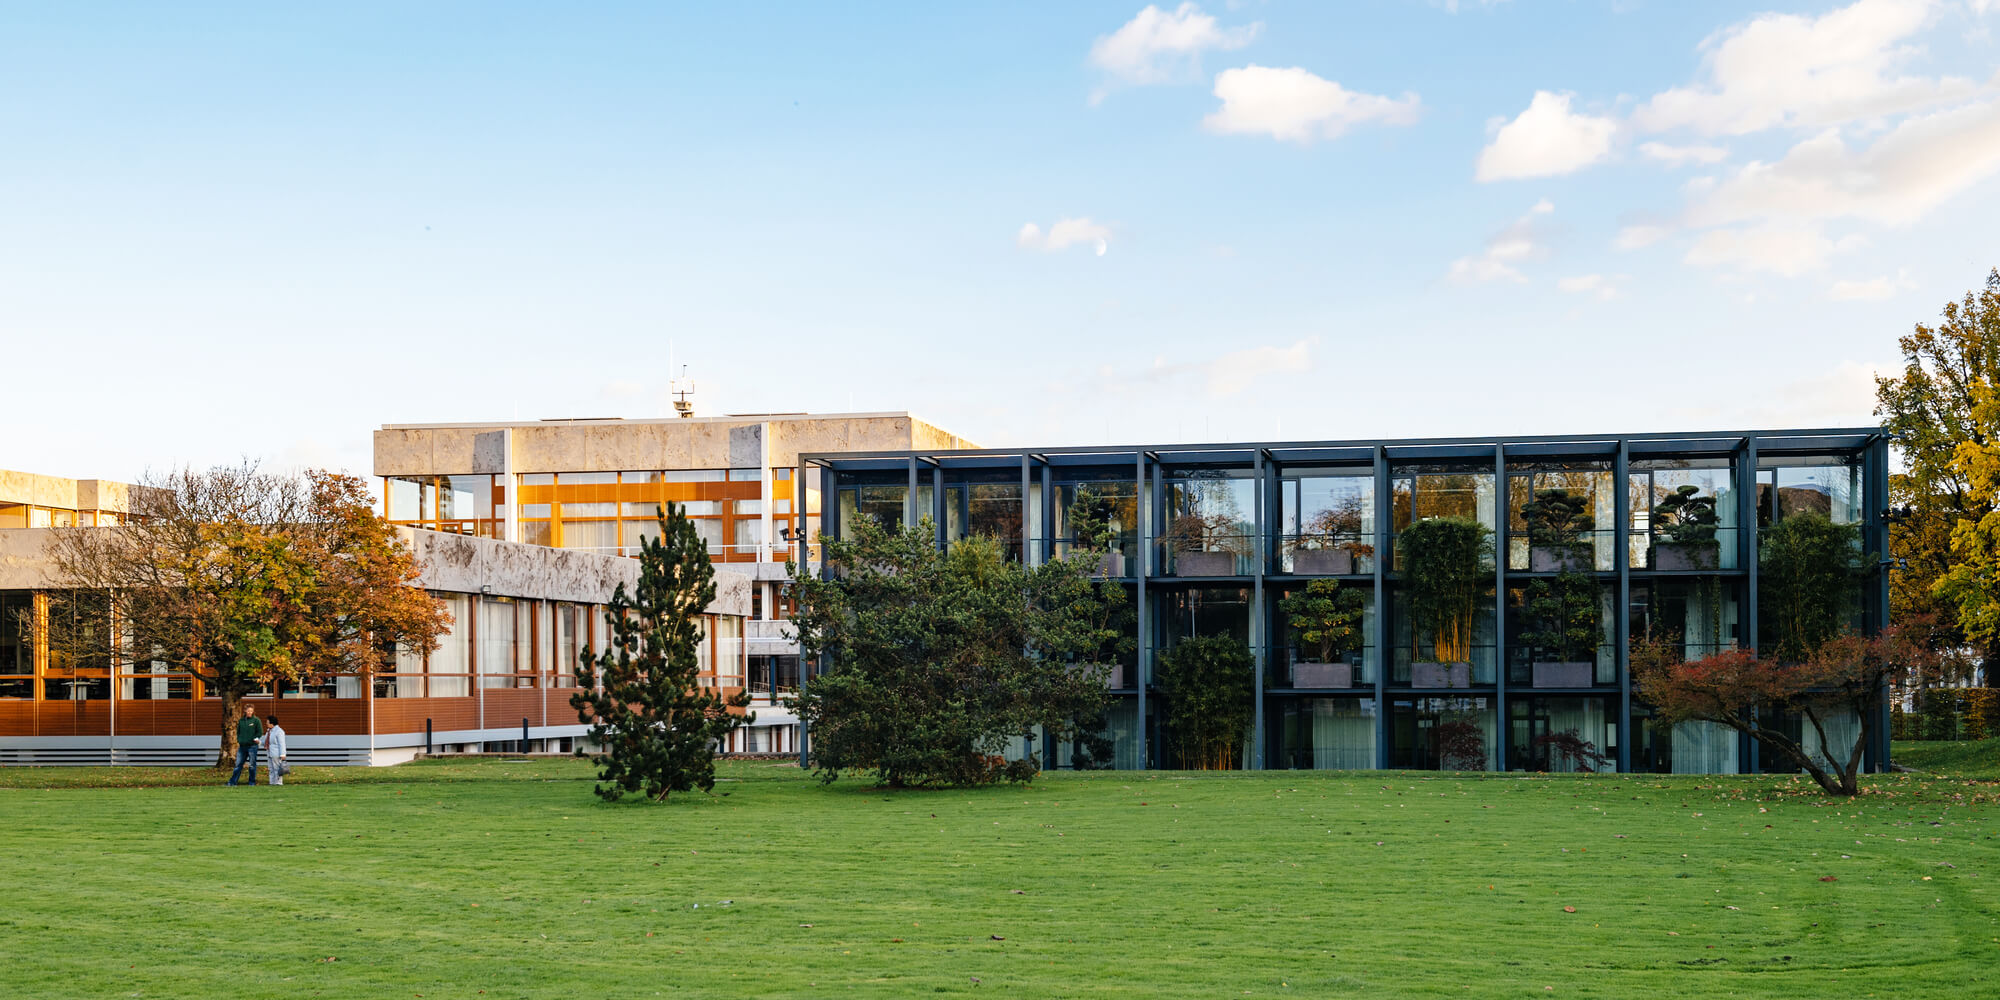 Panoramic image of a college building.